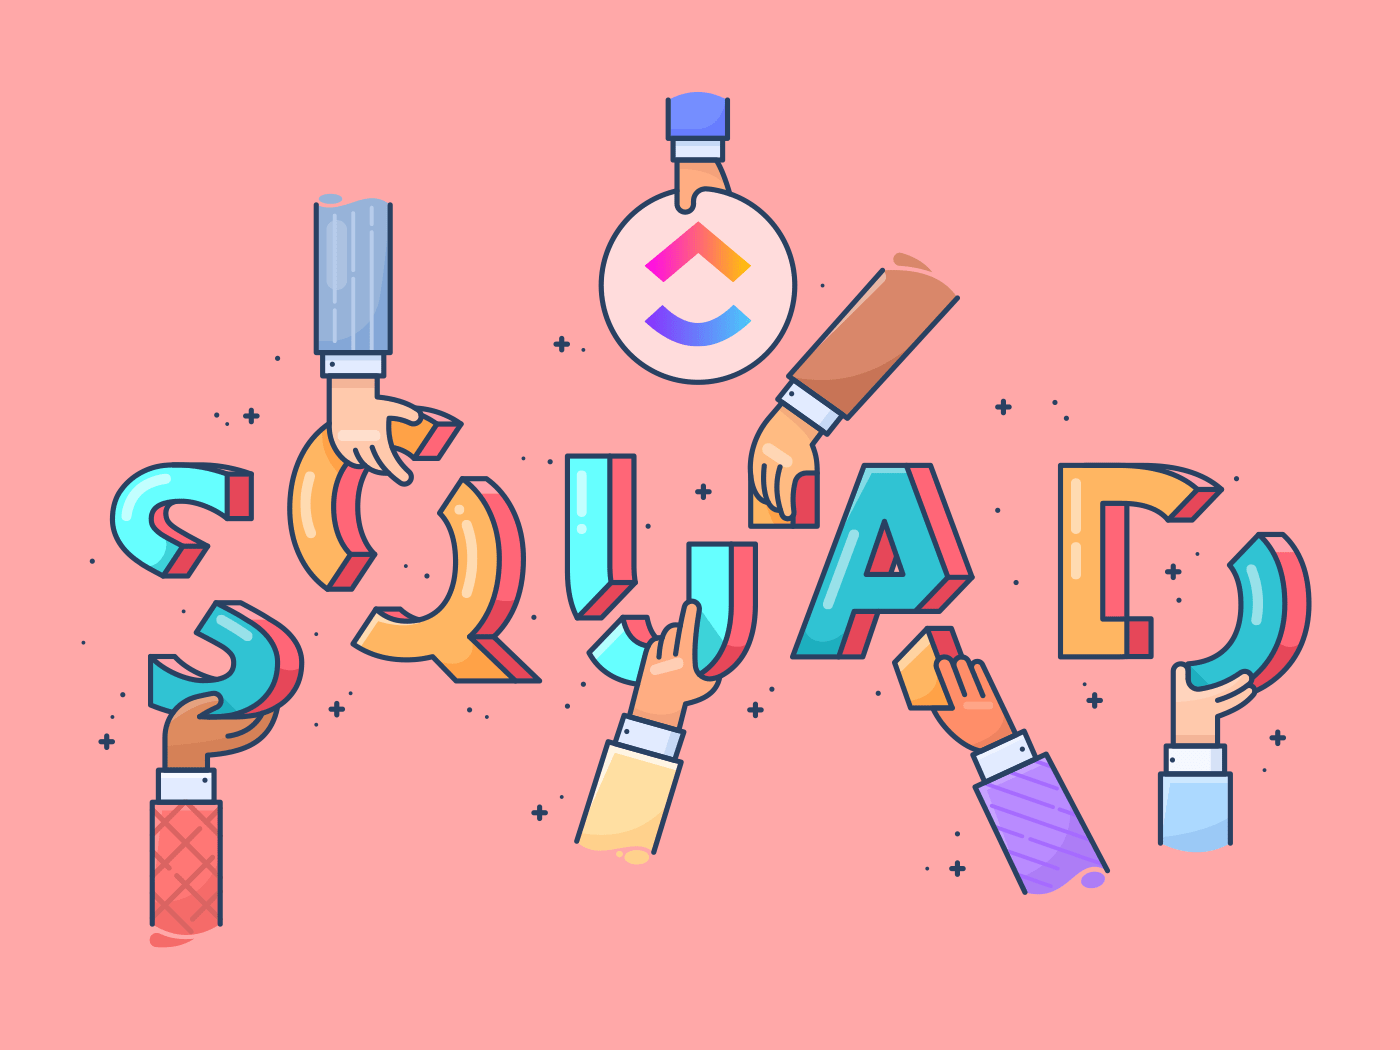 How Slite Uses Squads for Better Product Development